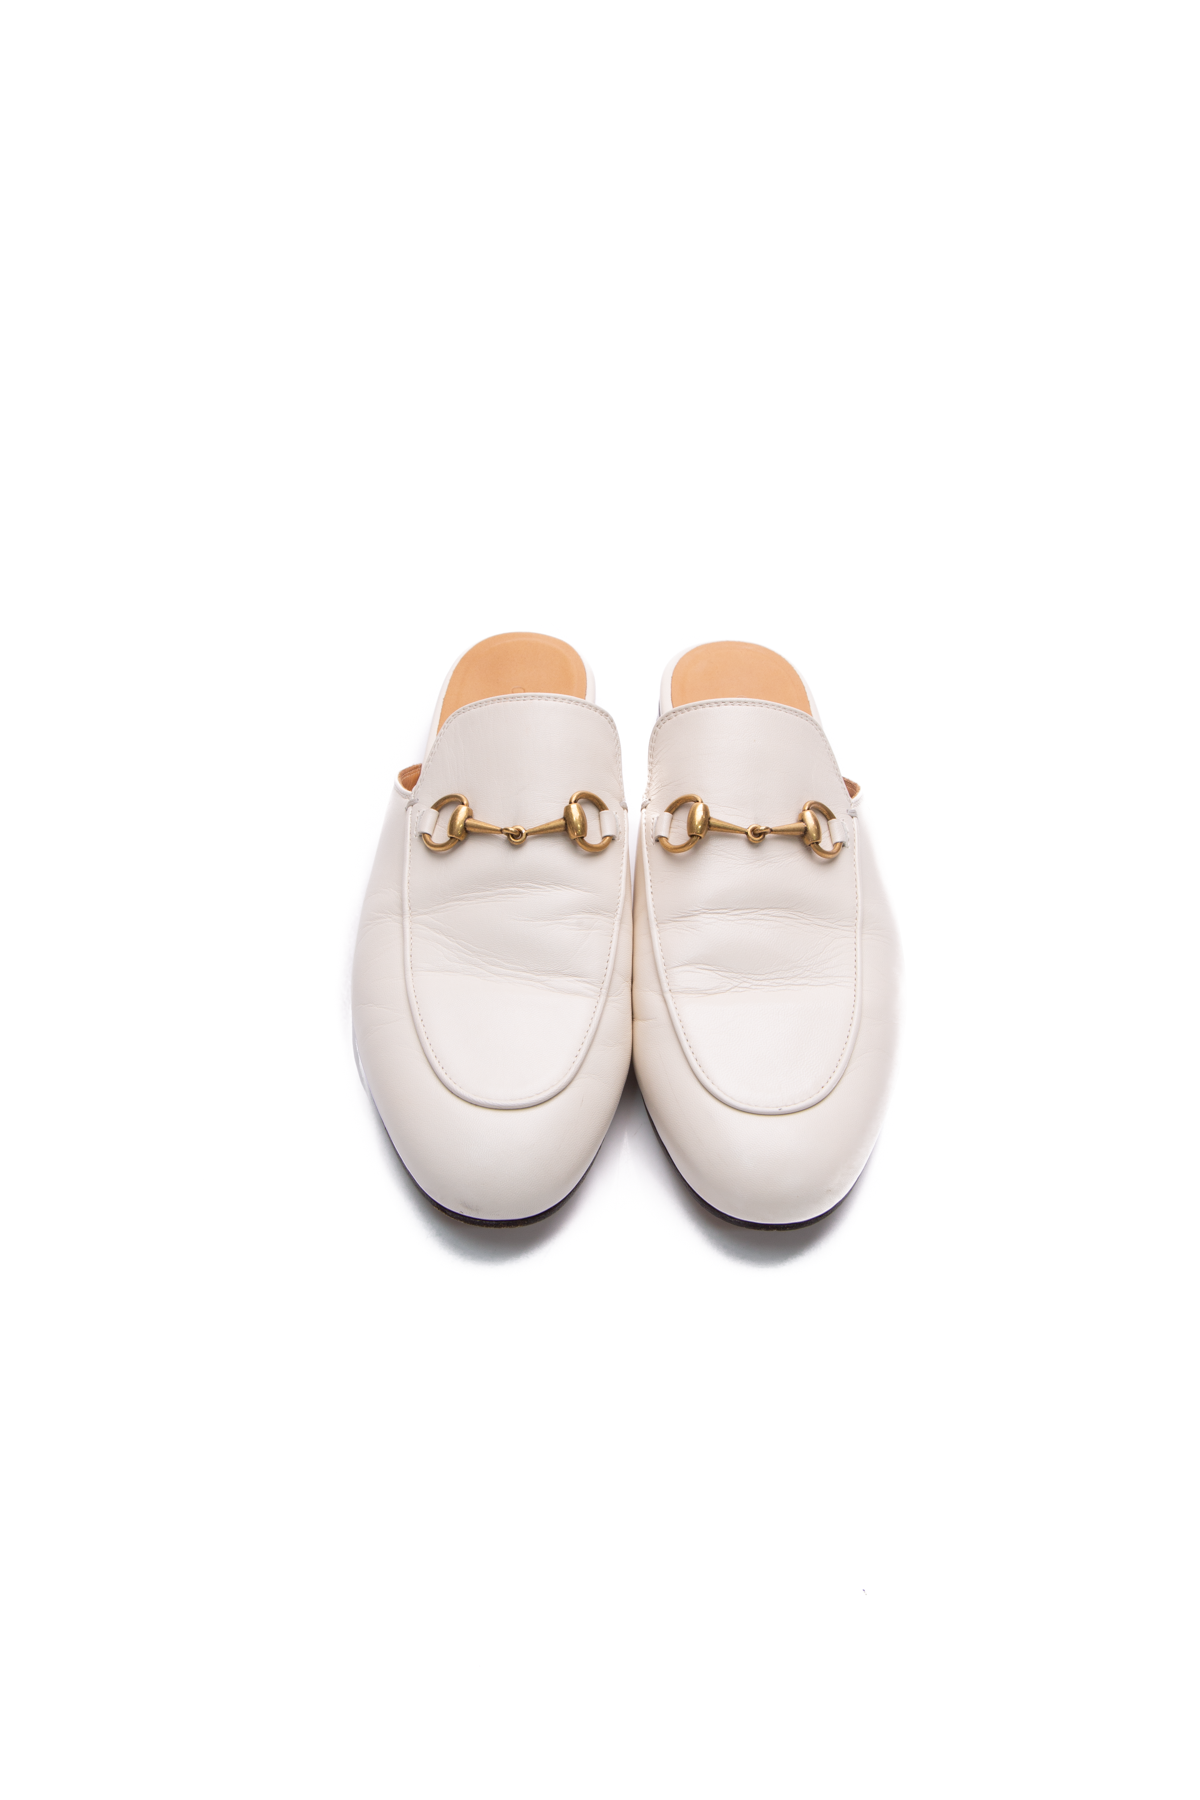 Gucci Ivory Princetown Mules- Size 38.5